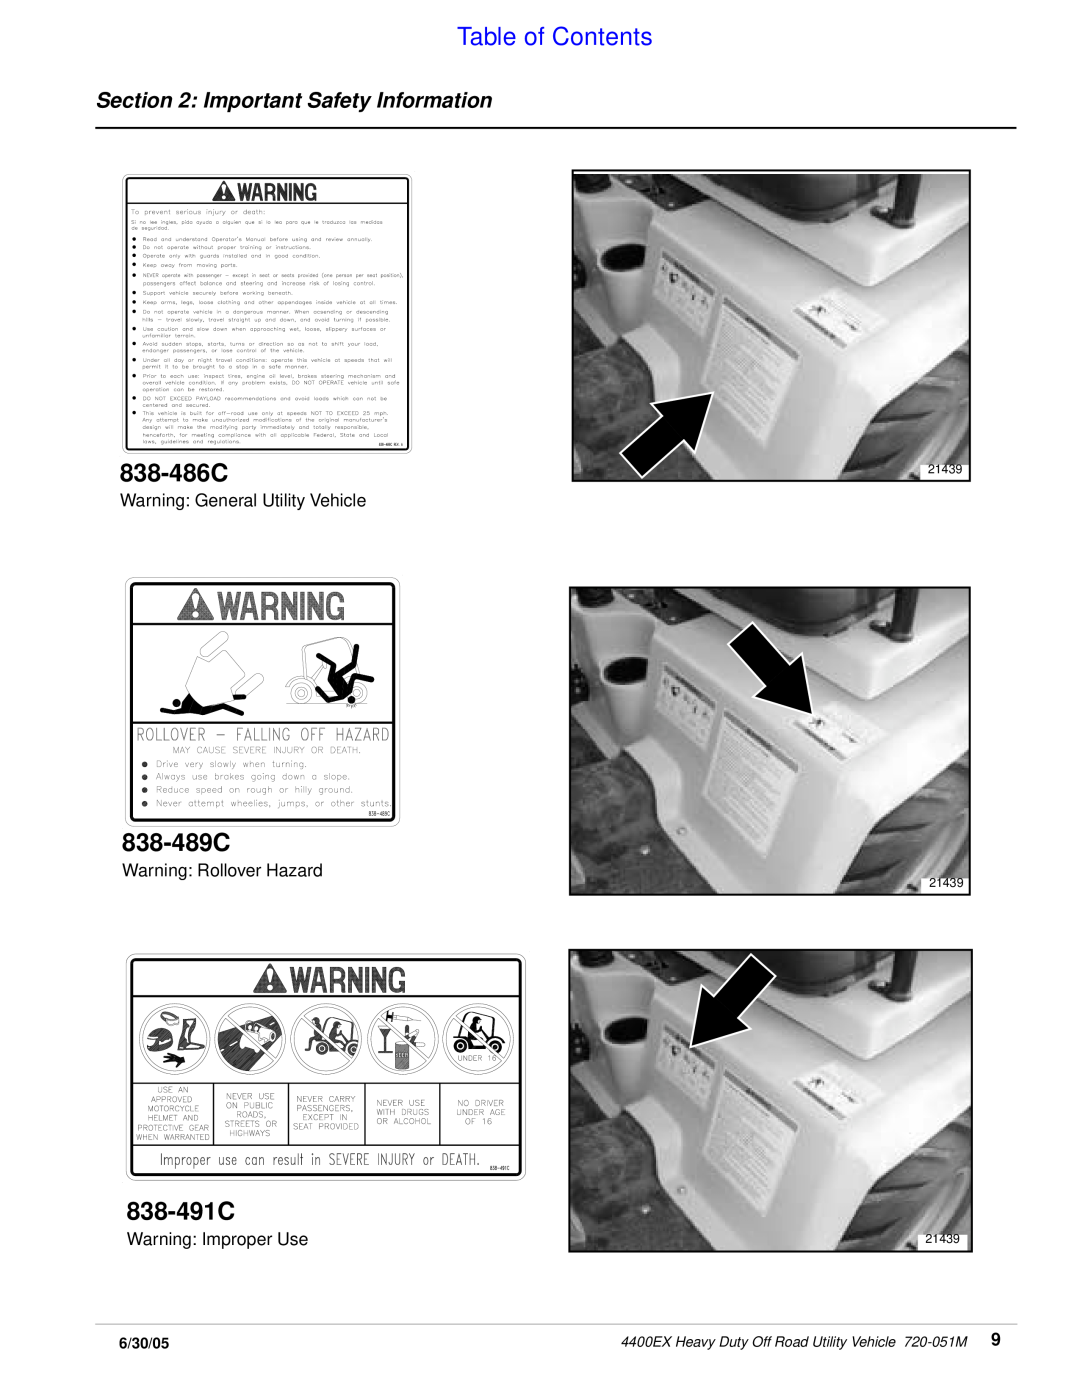 Land Pride 4400ex manual 838-486C, 838-489C, 838-491C, Table of Contents, Important Safety Information, 6/30/05 